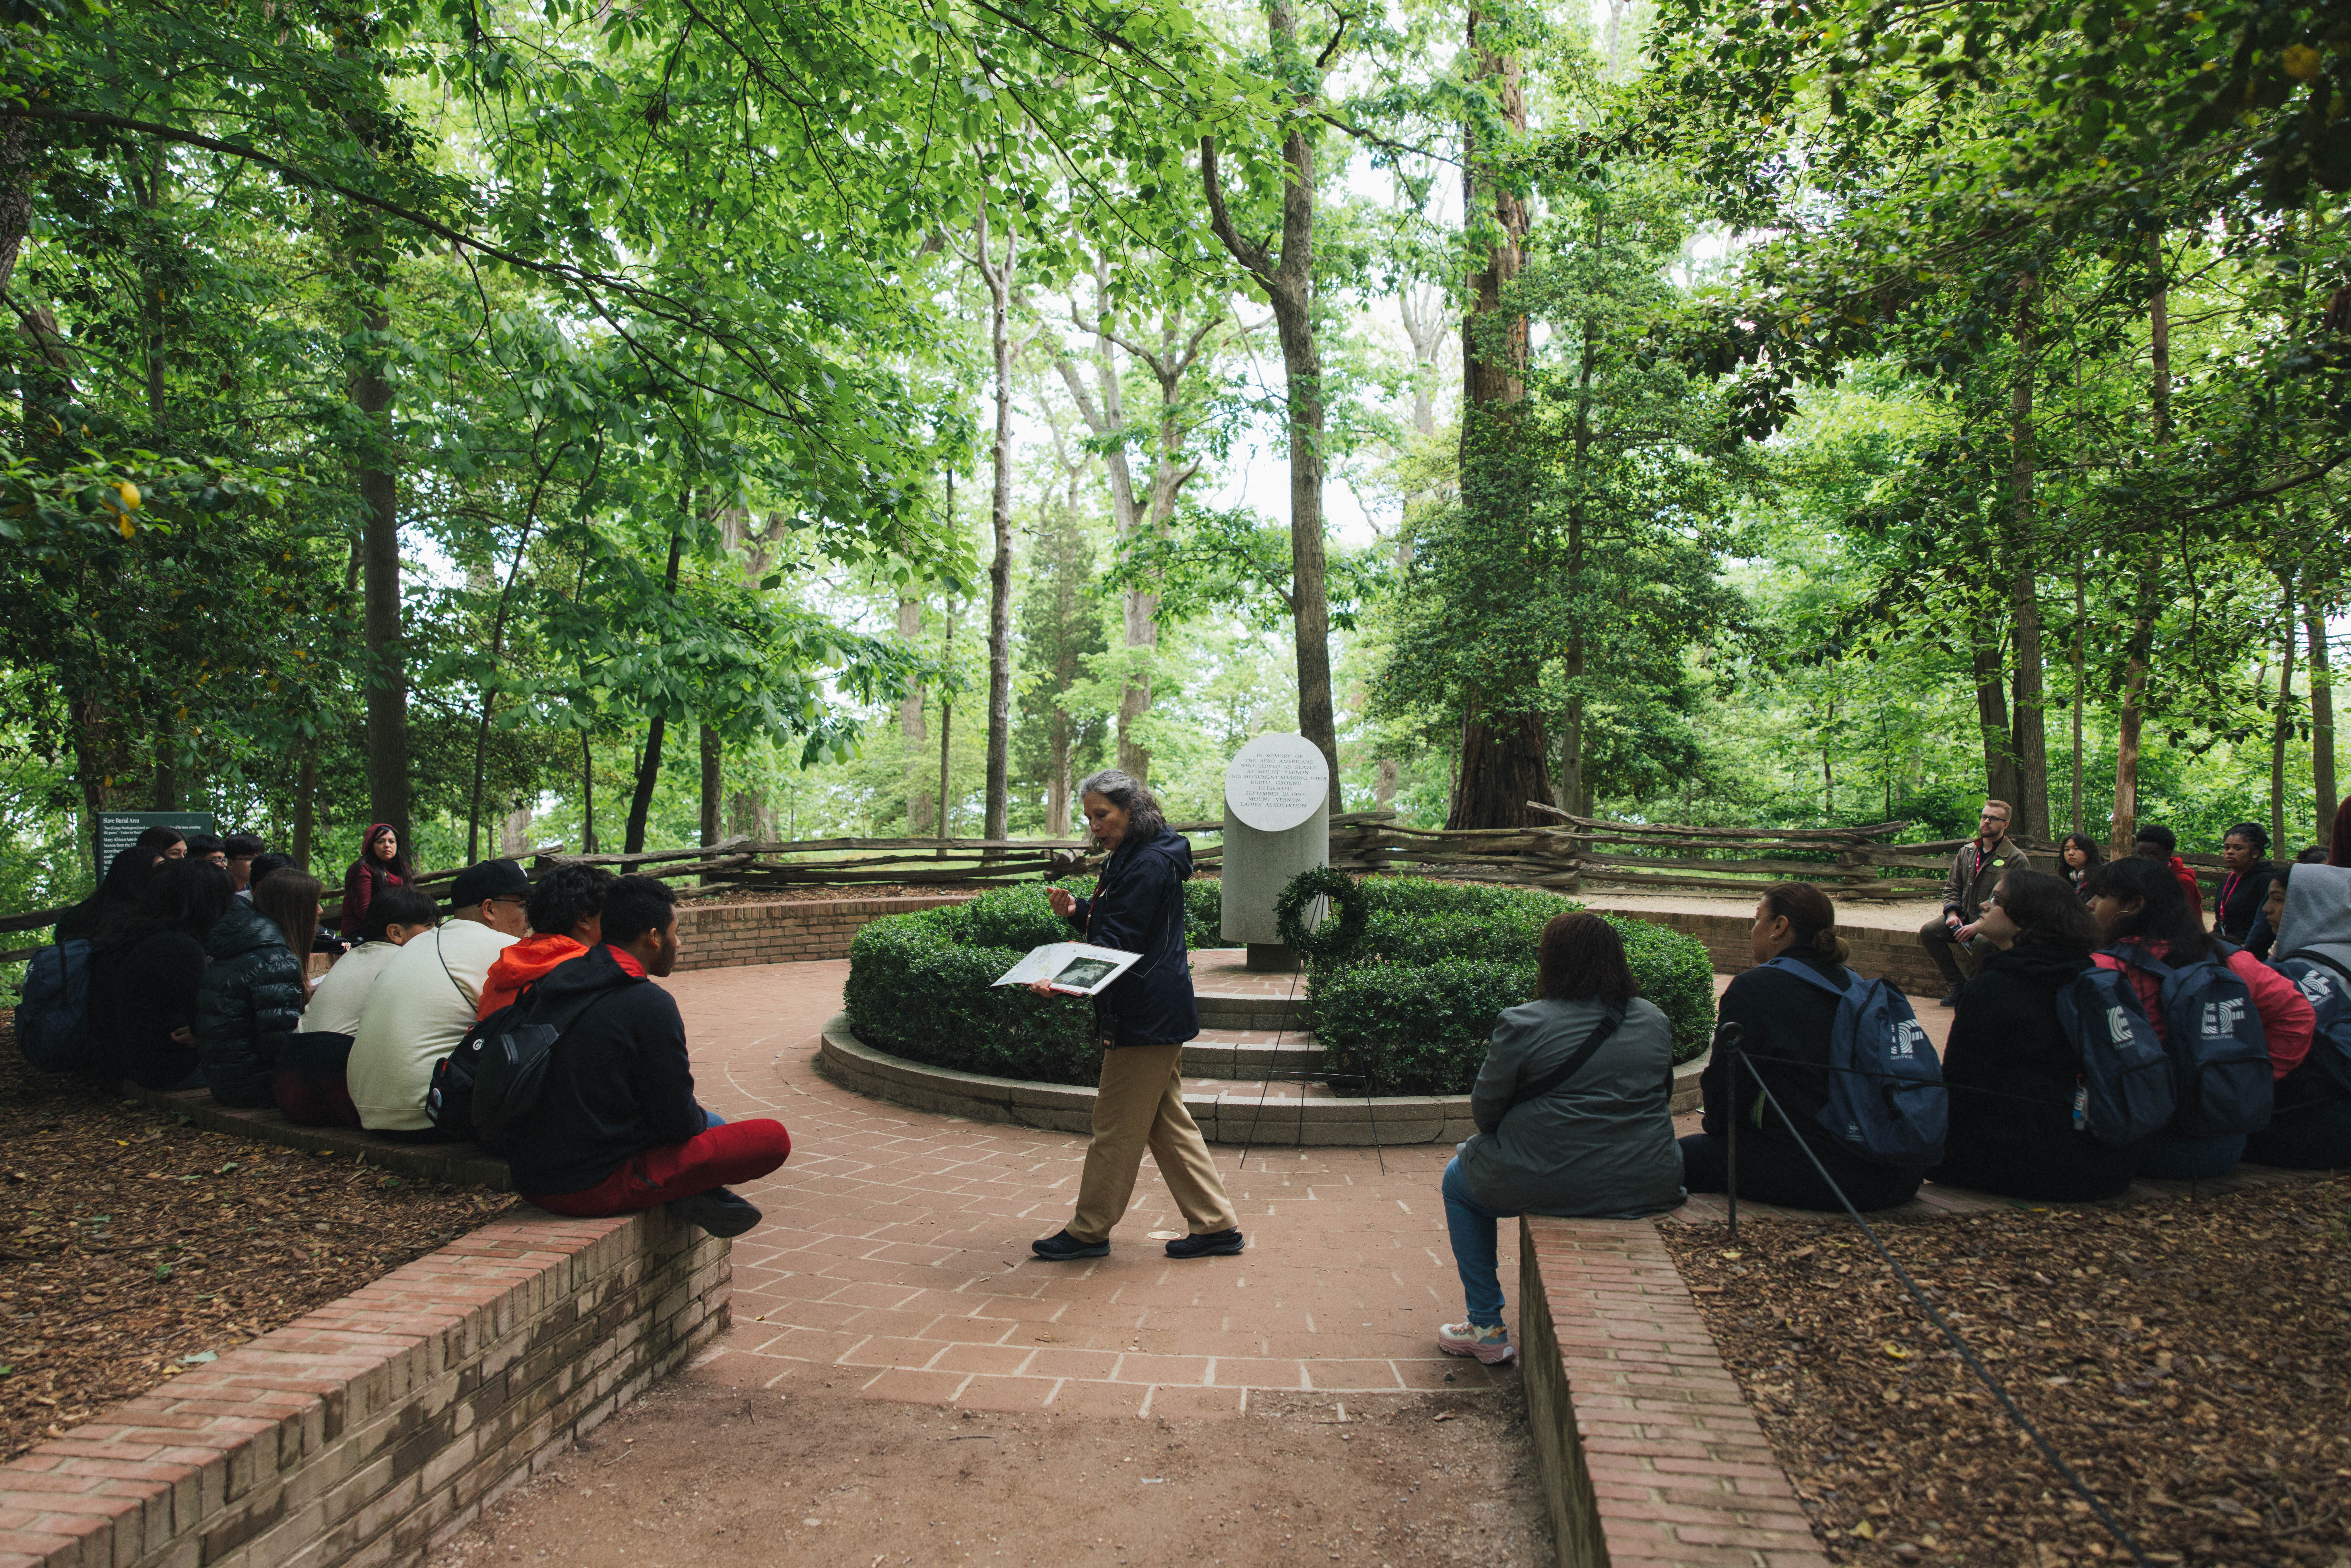 Inside Mount Vernon: Students gather around the Slave Memorial as a tour guide explains the significance of the monument.